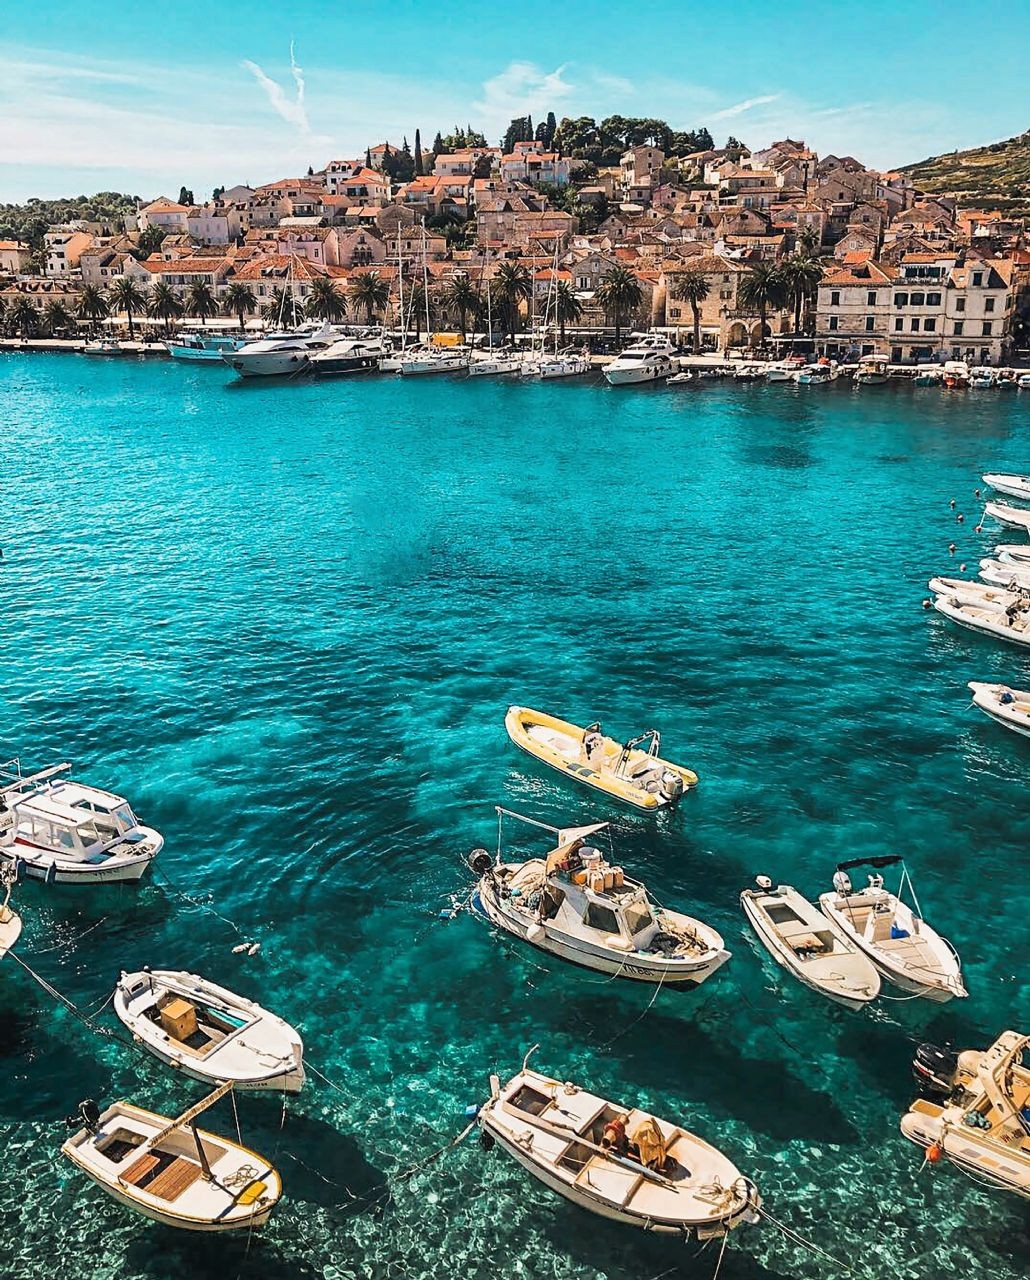 Croatia is a true paradise for vacationers and tourists a like.